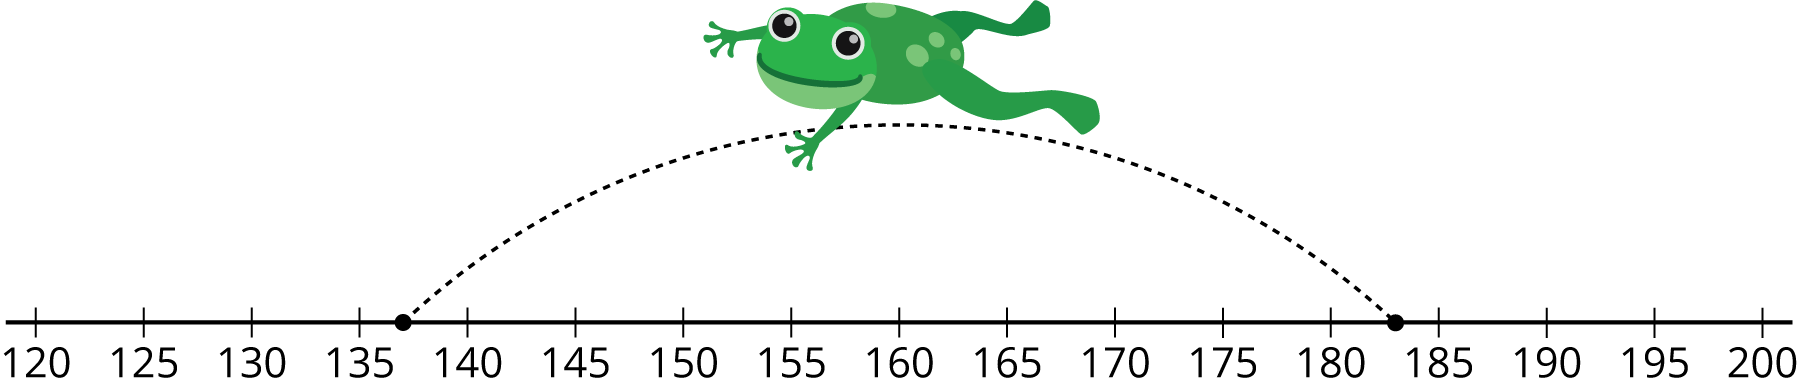 Number line. Scale 120 to 200 by fives. Equally spaced tick marks. Frog jumps from a point between 180 and 185 to a point between 135 and 140.